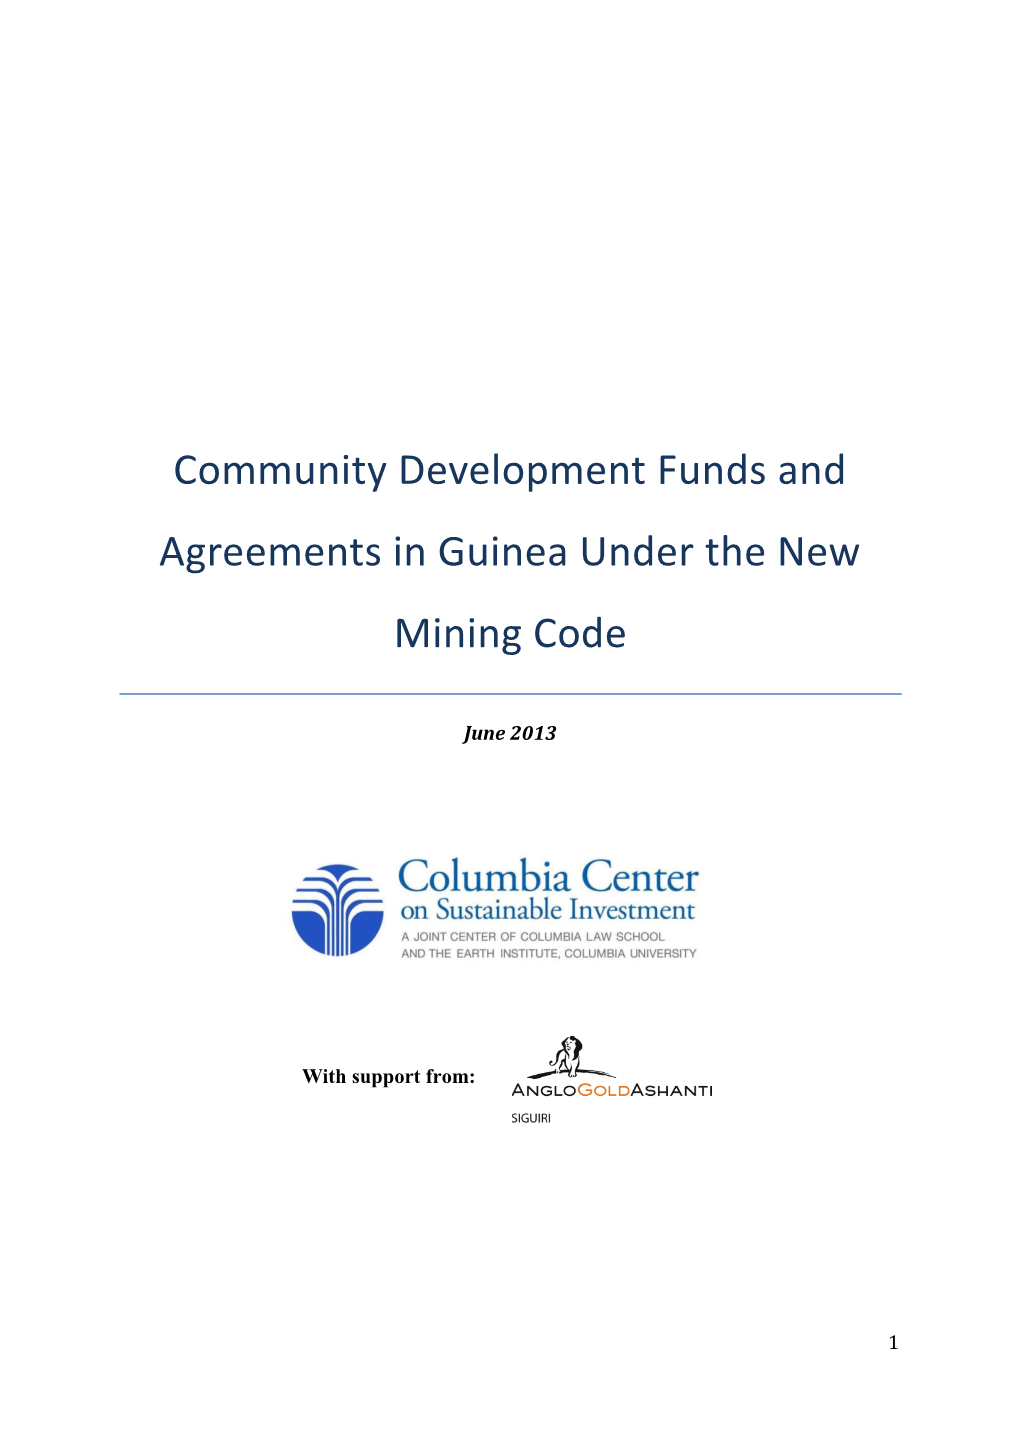 Community Development Funds and Agreements in Guinea Under the New Mining Code